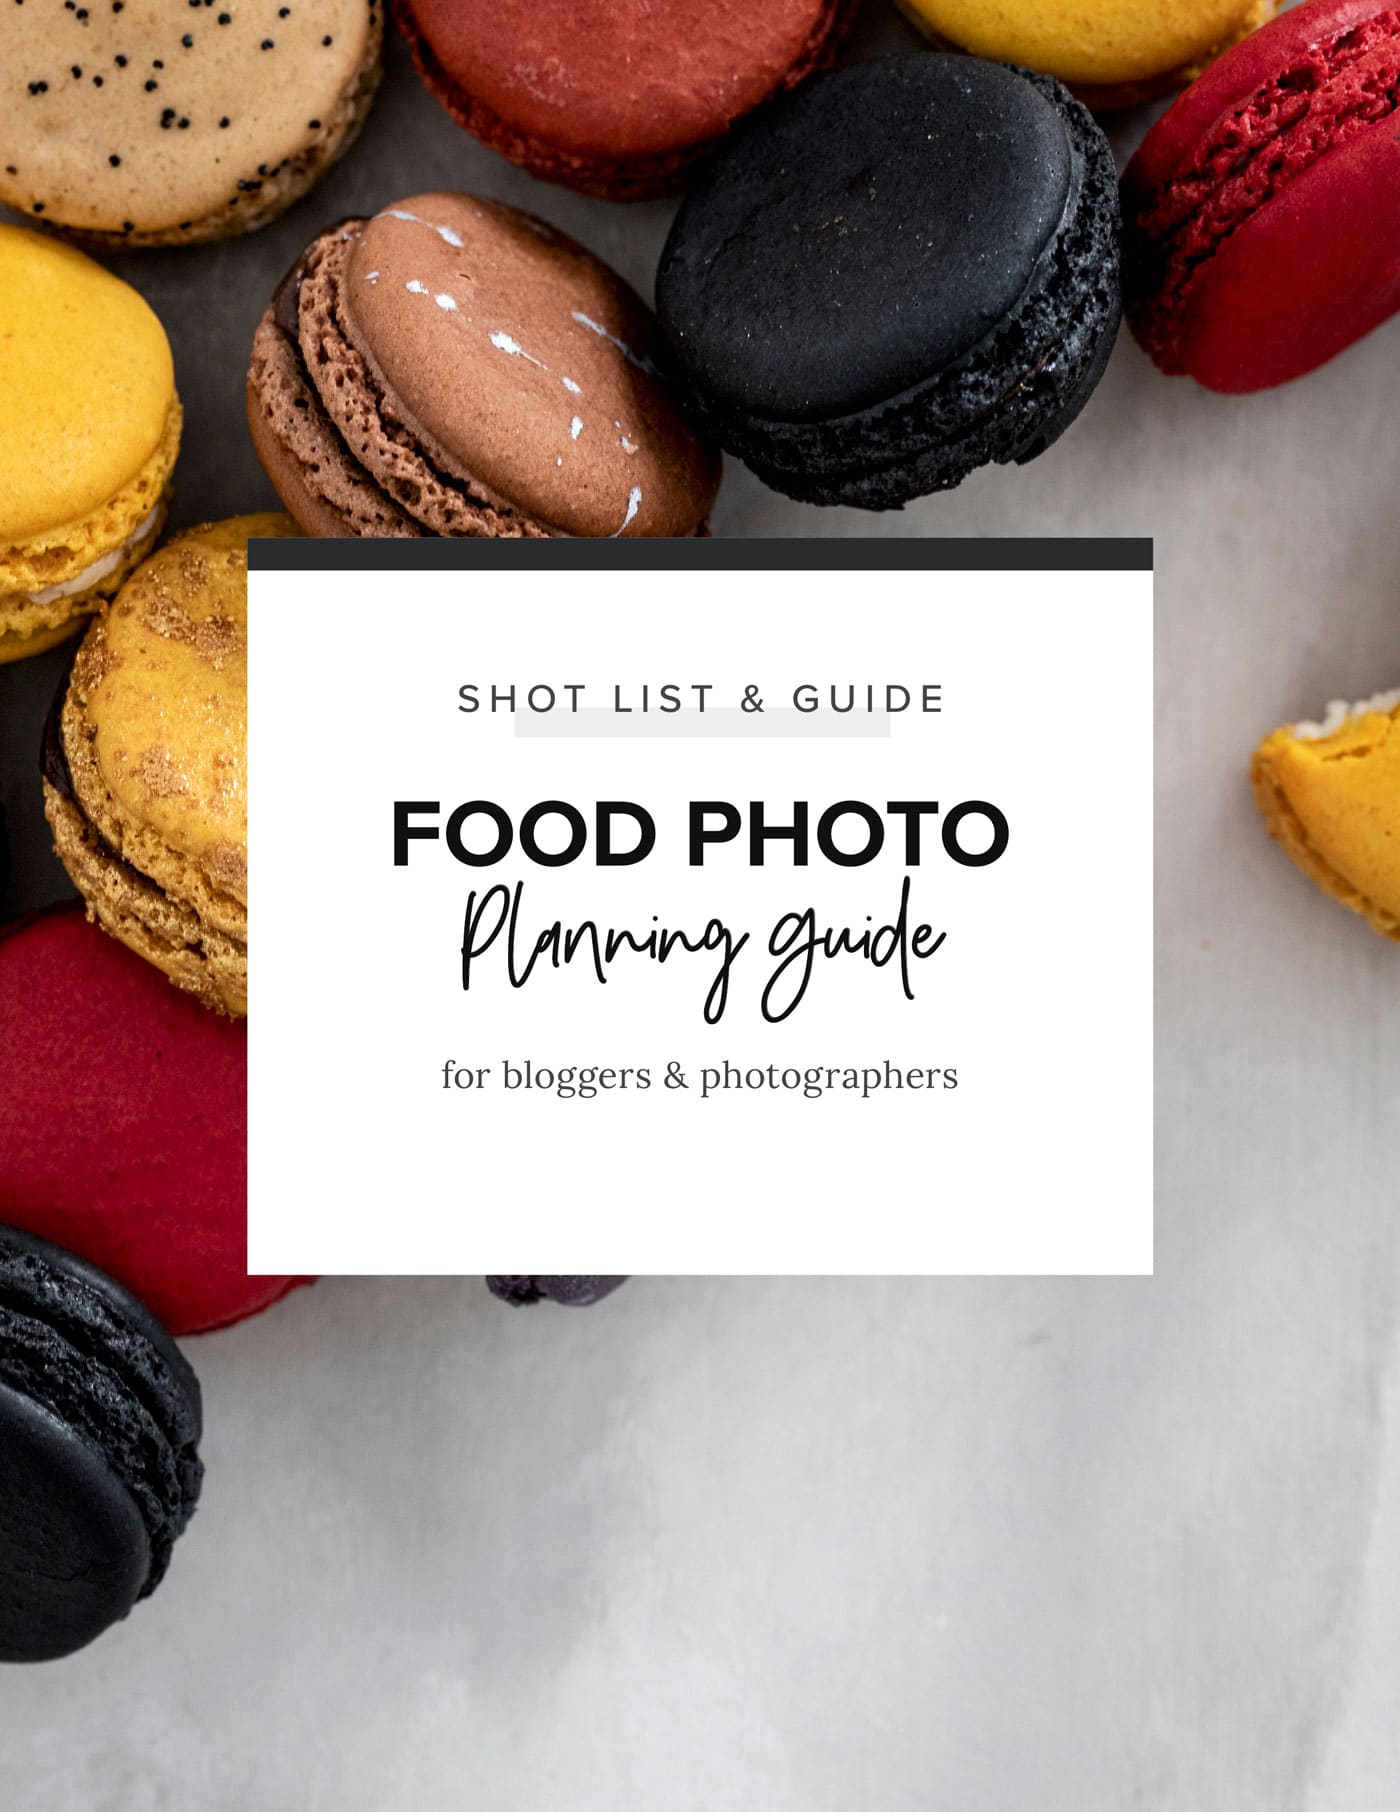 food photo planning guide and shot list